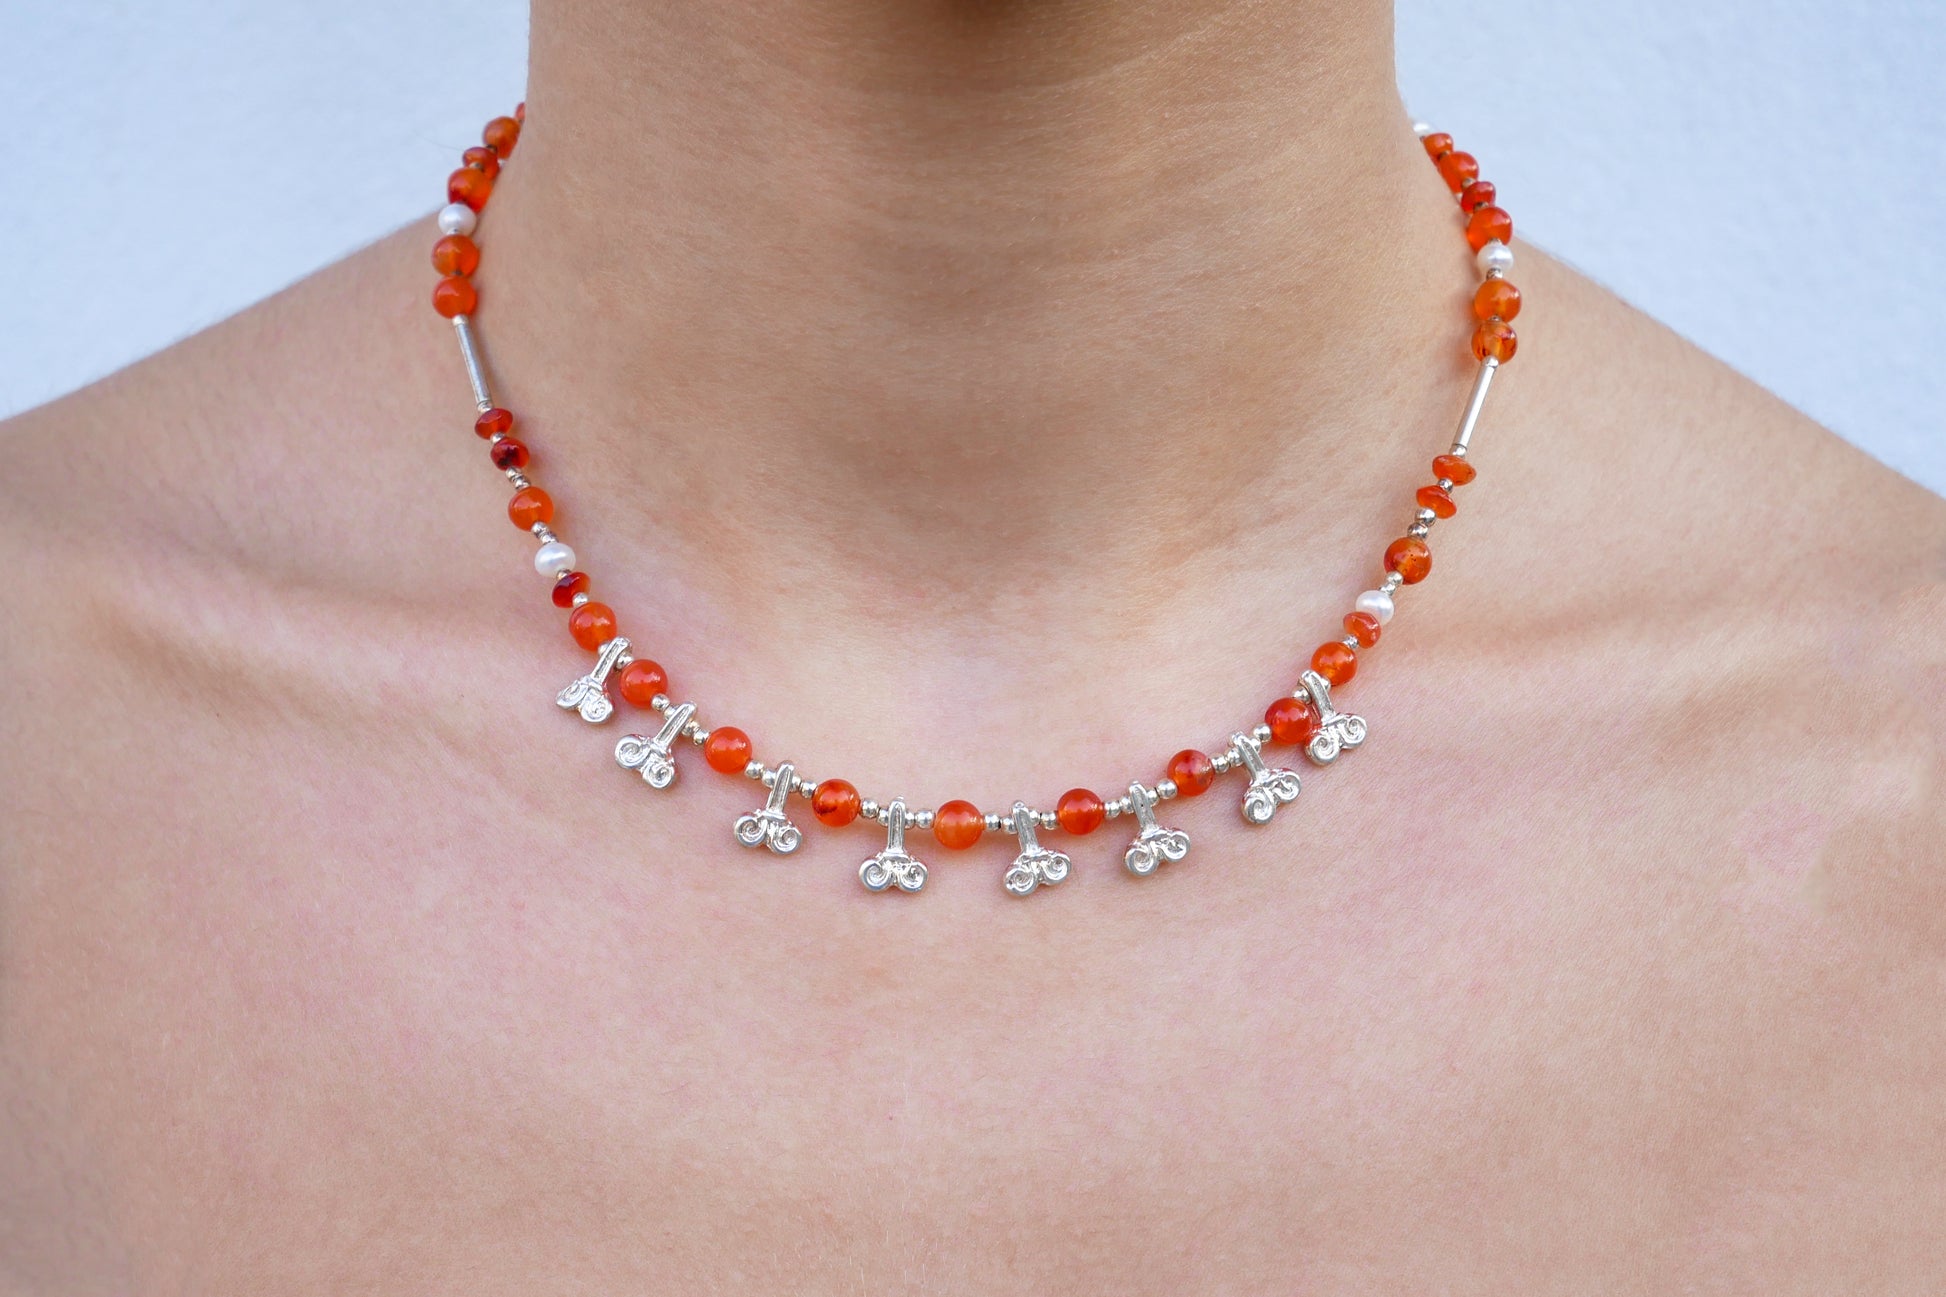 Carnelians, Pearls, and Silver Lilies Necklace - Katerina Roukouna